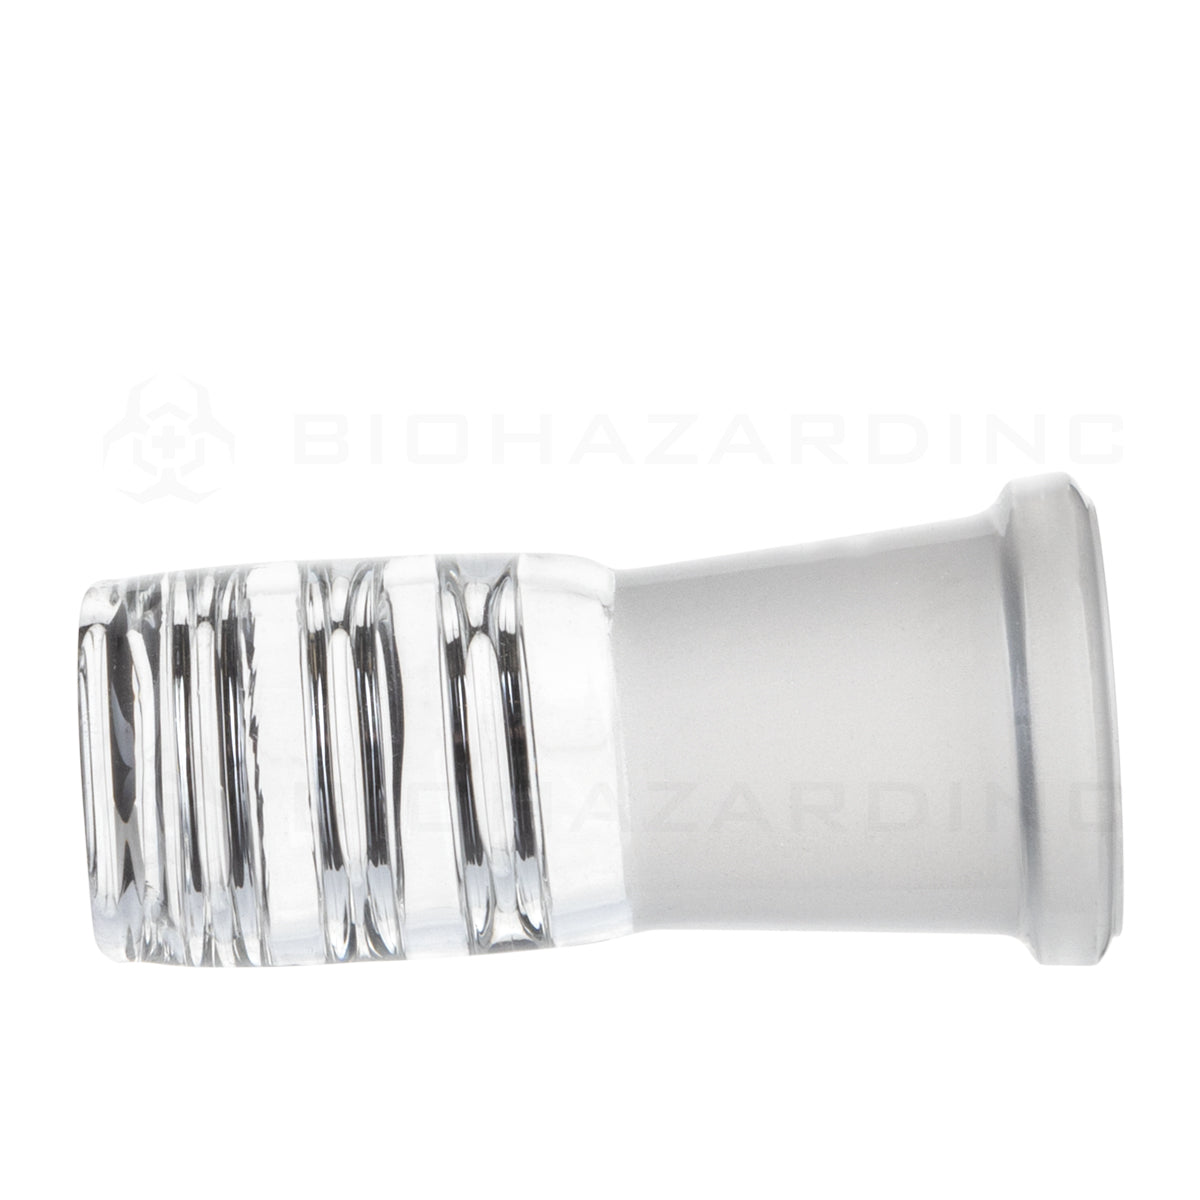 Dome | Tube Dome W/ Rings | 19mm - Glass - 12 Count 19mm Dome Biohazard Inc   